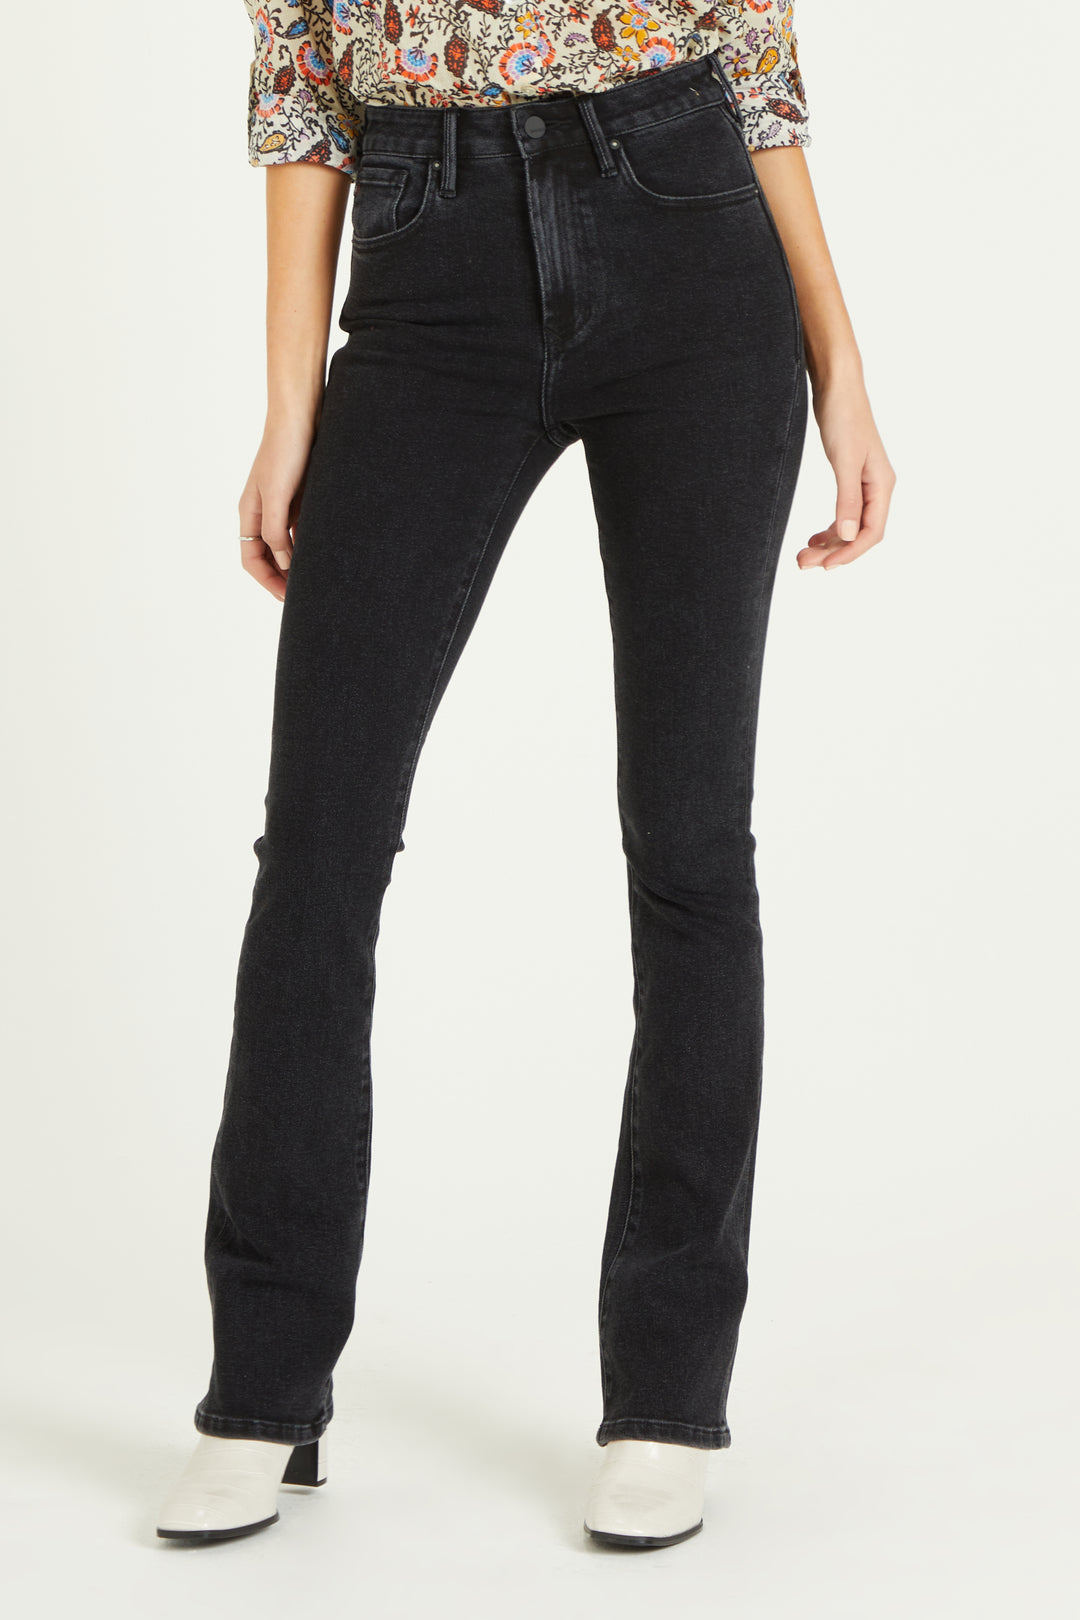 image of a female model wearing a 11" SUPER HIGH RISE ROBBIE FLARE IN BLACK TRAIL JEANS